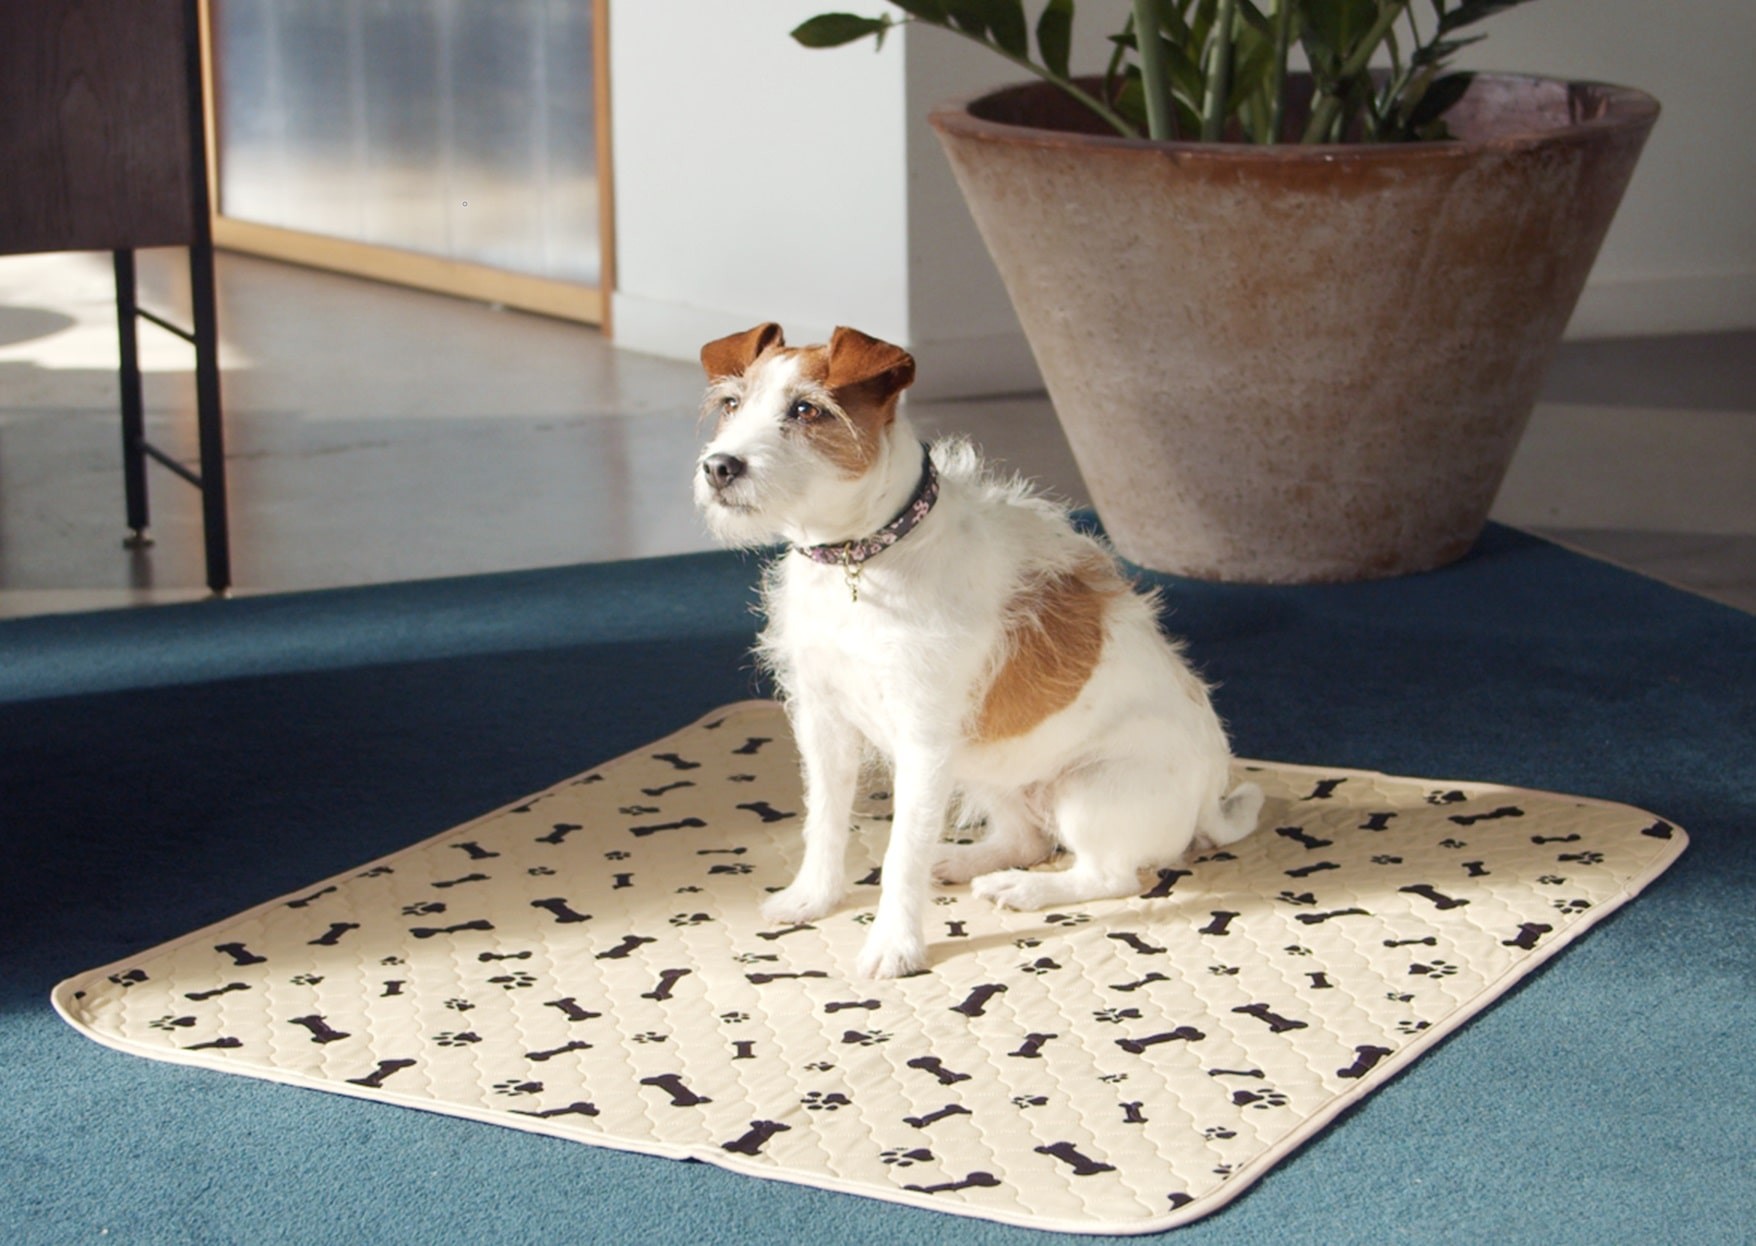 A Russel Terrier dog using a Potty Buddy reusable potty pad